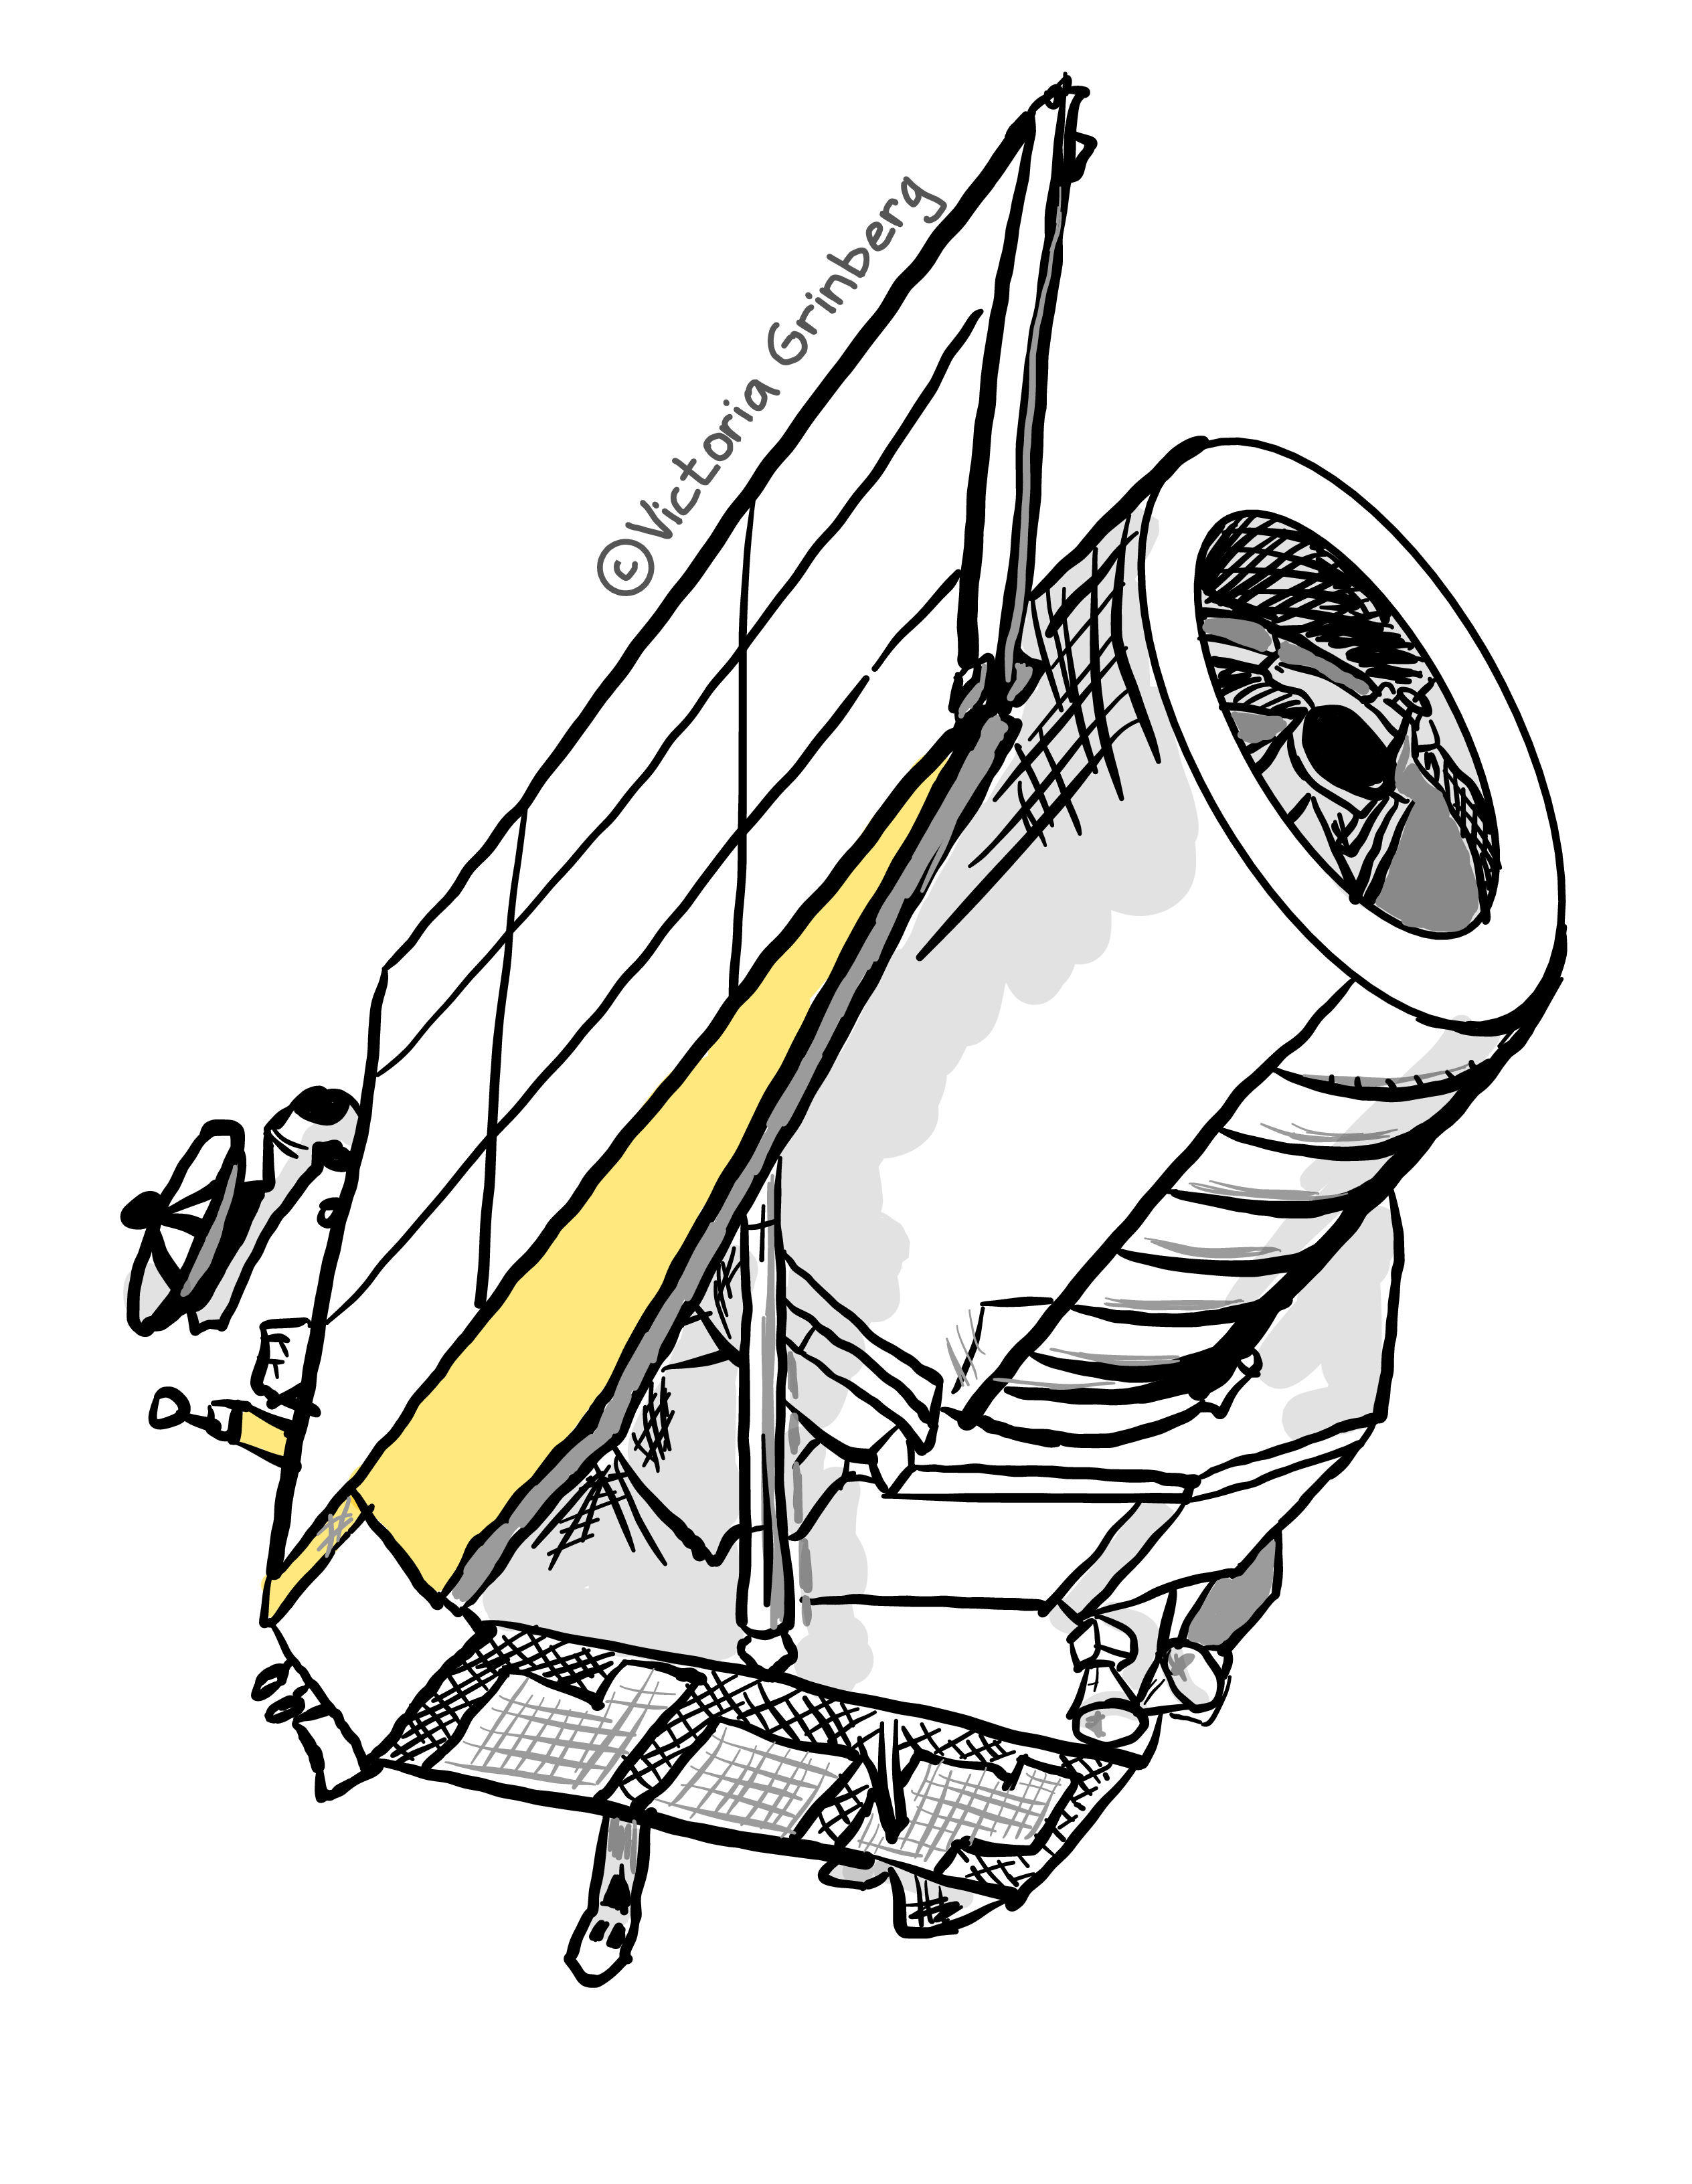 Digital sketch of ESA's Euclid telescope: black and white and grey, with some yellow/gold.